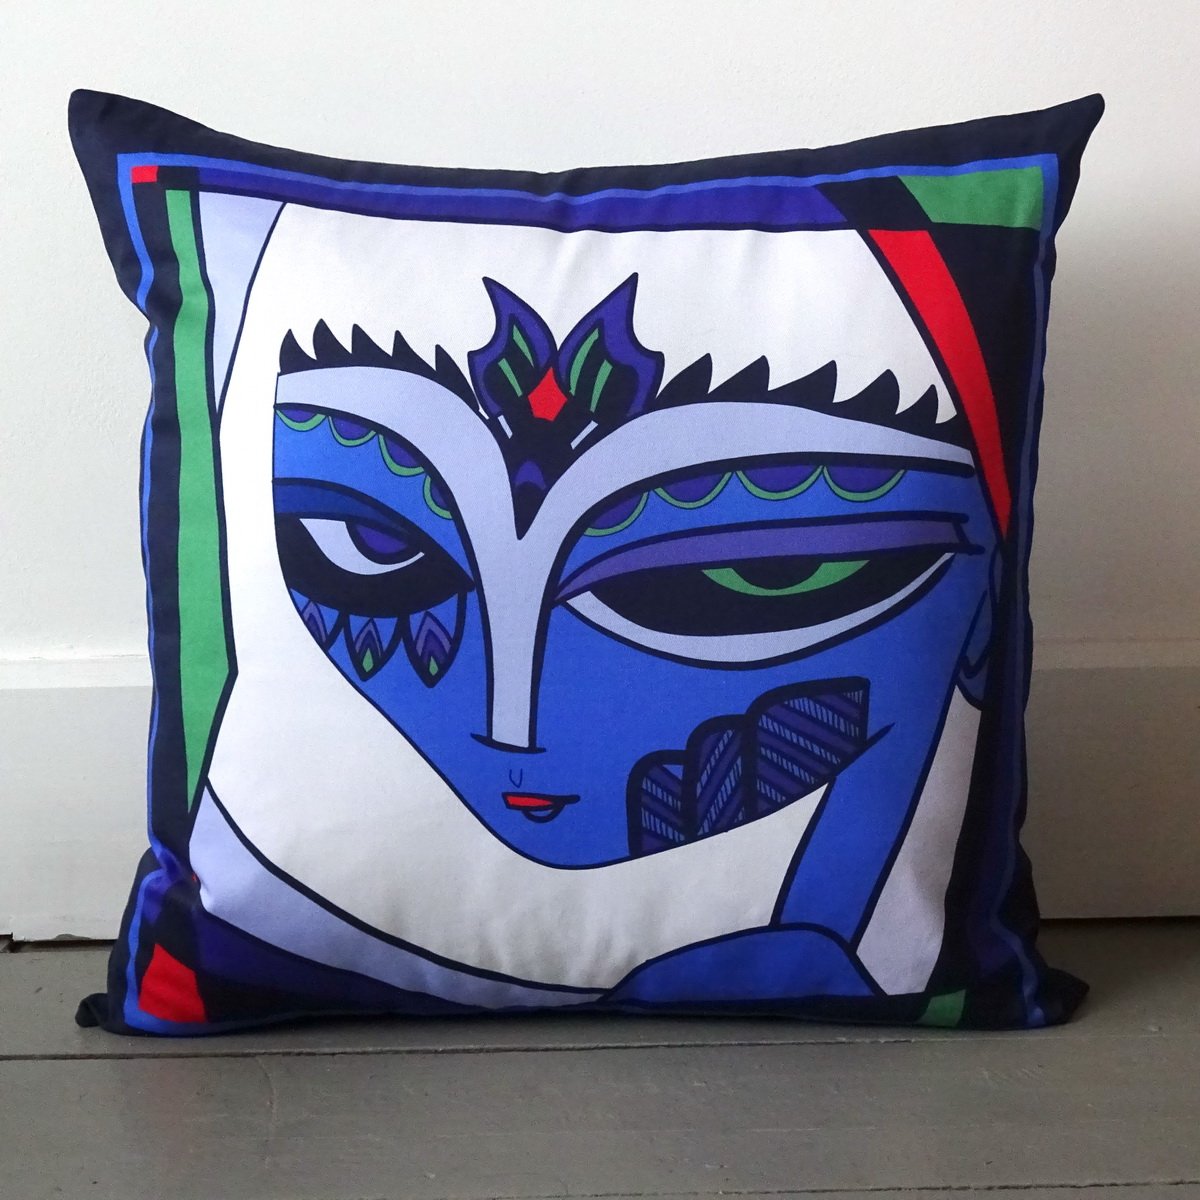 Fiona the Fierce cushion Bright and collurful face with blues red purple and white. wicked imp designs